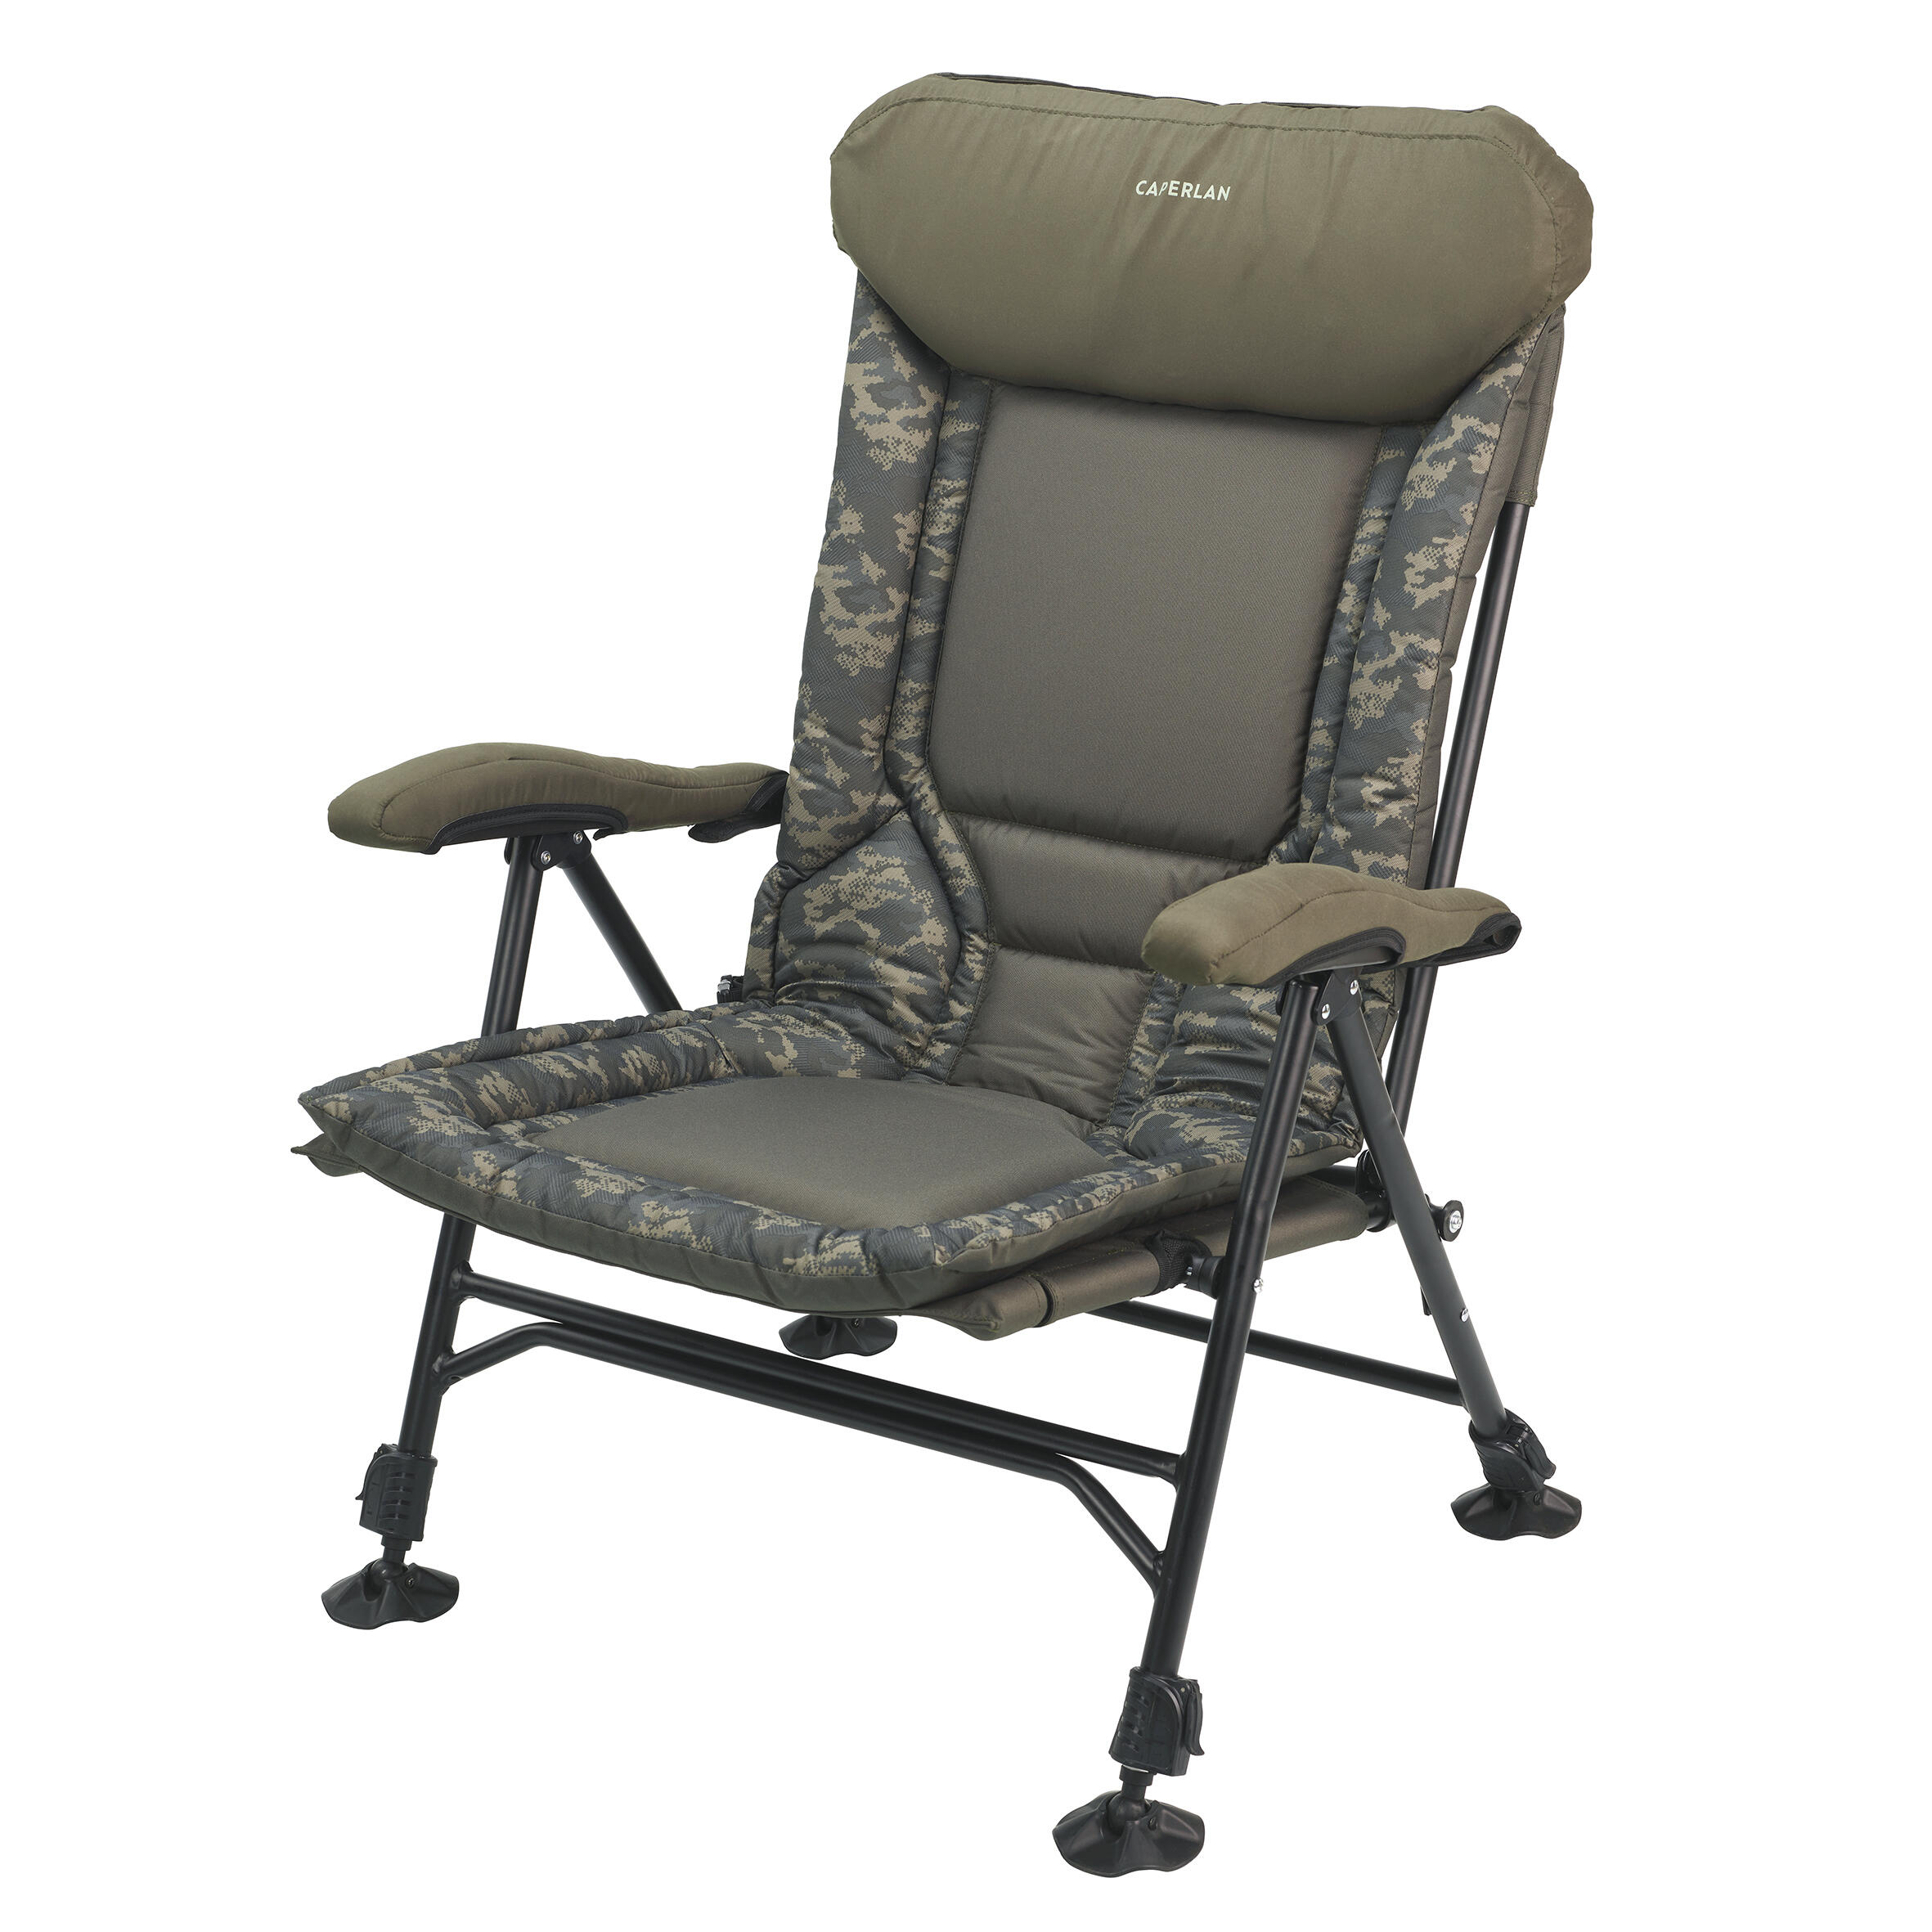 Buy Fishing Camp Chair Online